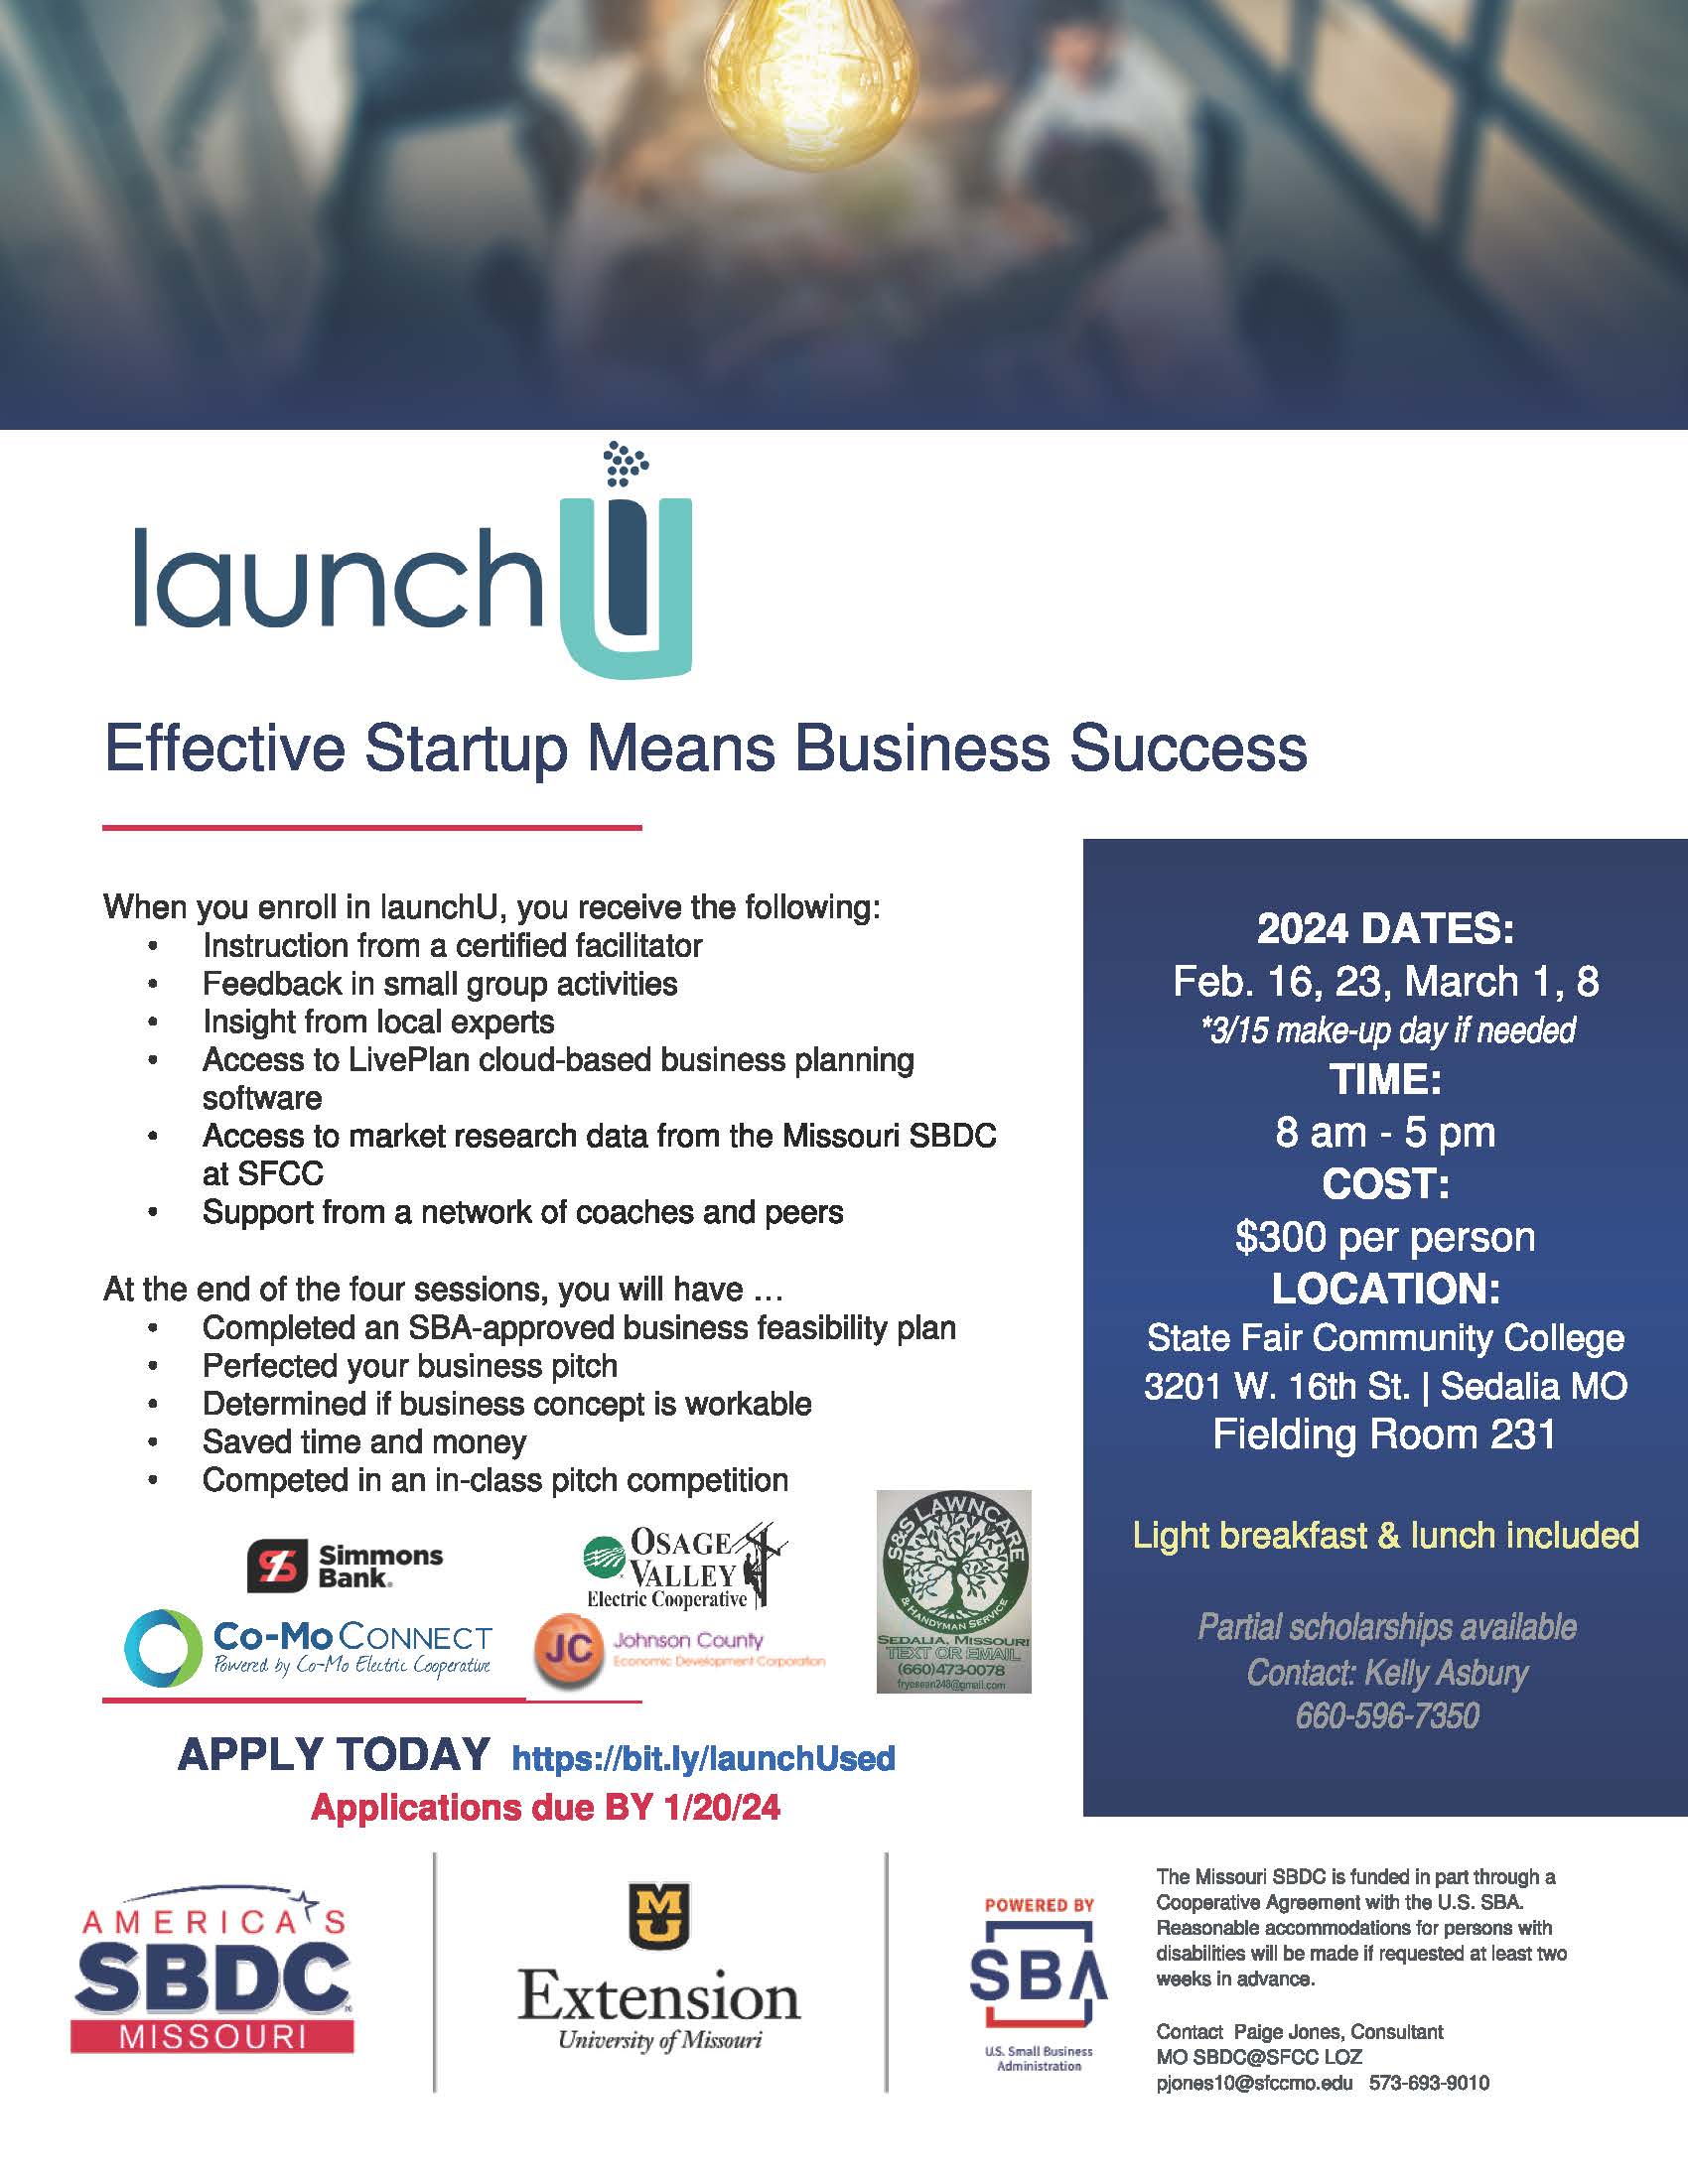 Read more about Missouri SBDC to offer 4-session entrepreneur, start-up course